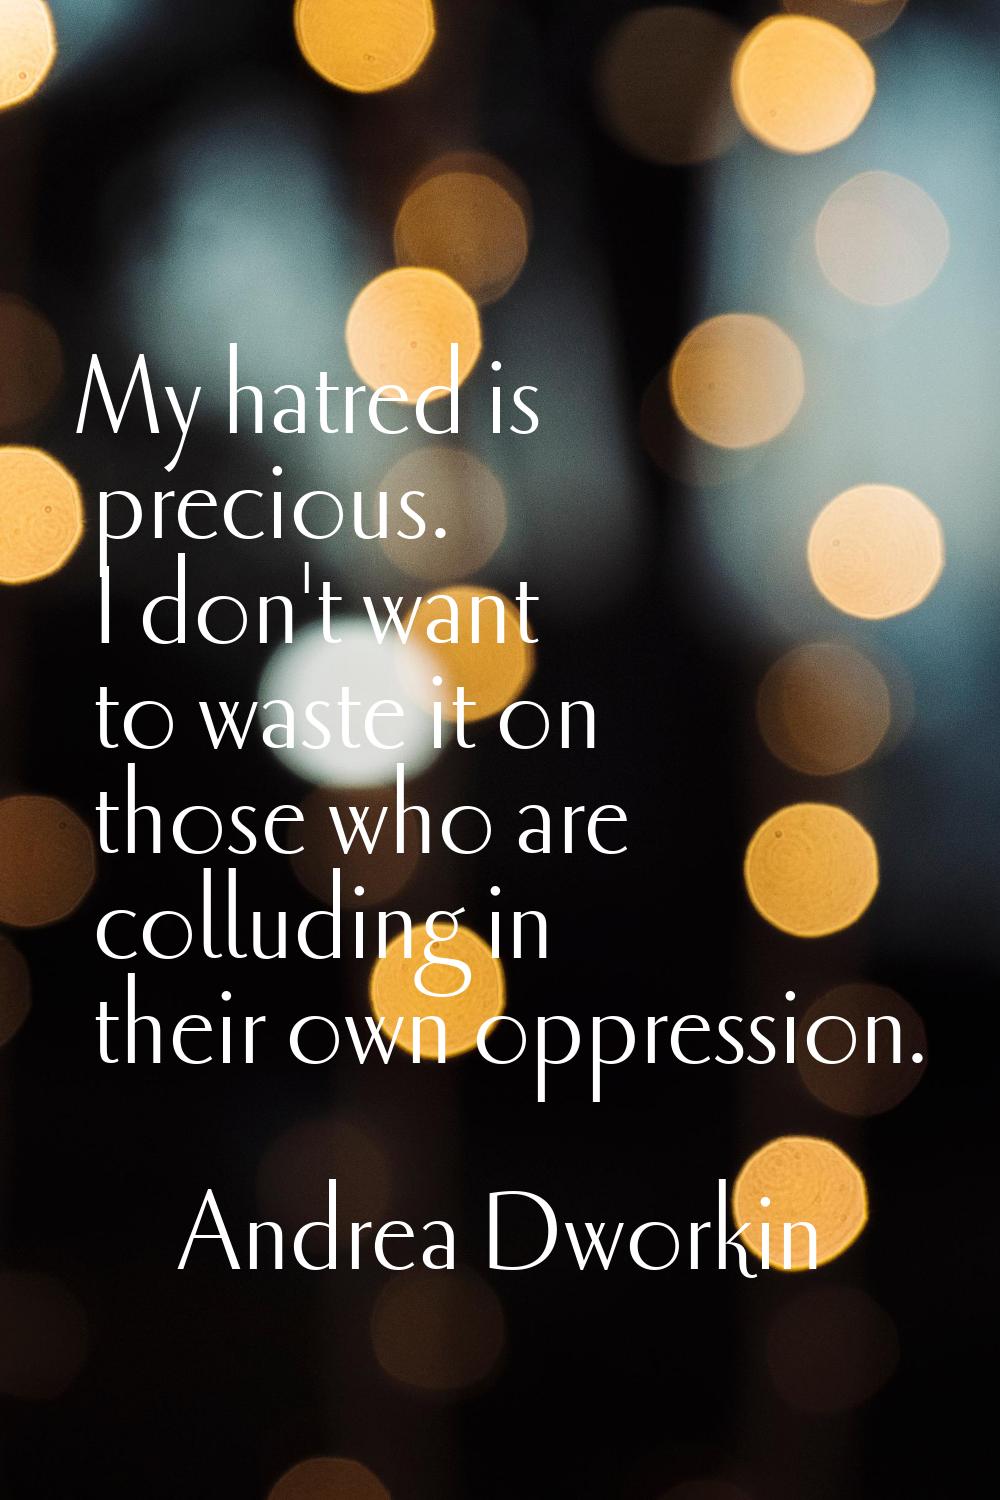 My hatred is precious. I don't want to waste it on those who are colluding in their own oppression.